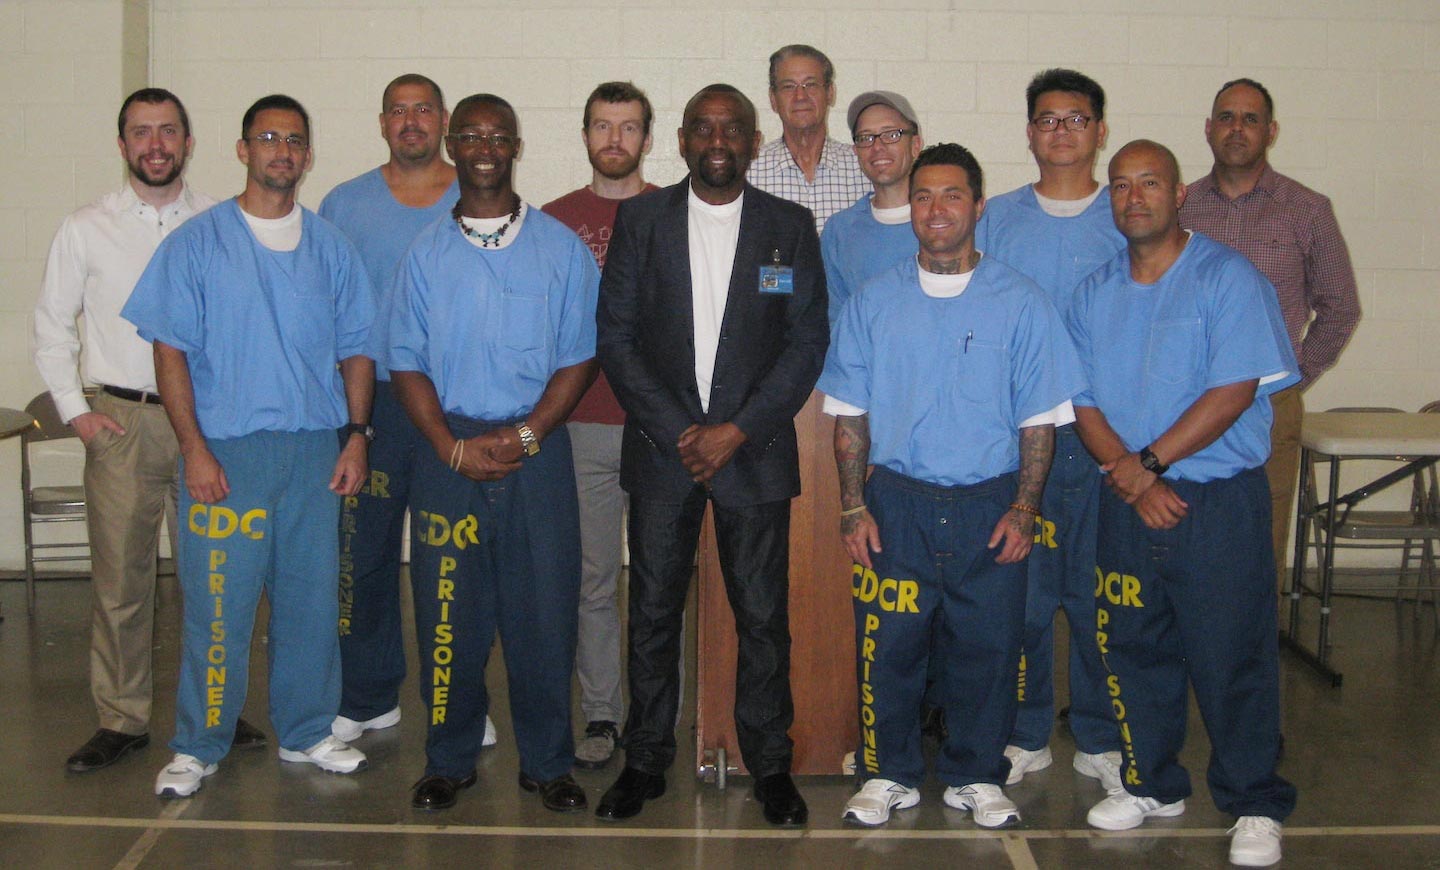 AN INMATE'S POWERFUL STORY OF Rebuilding the Man